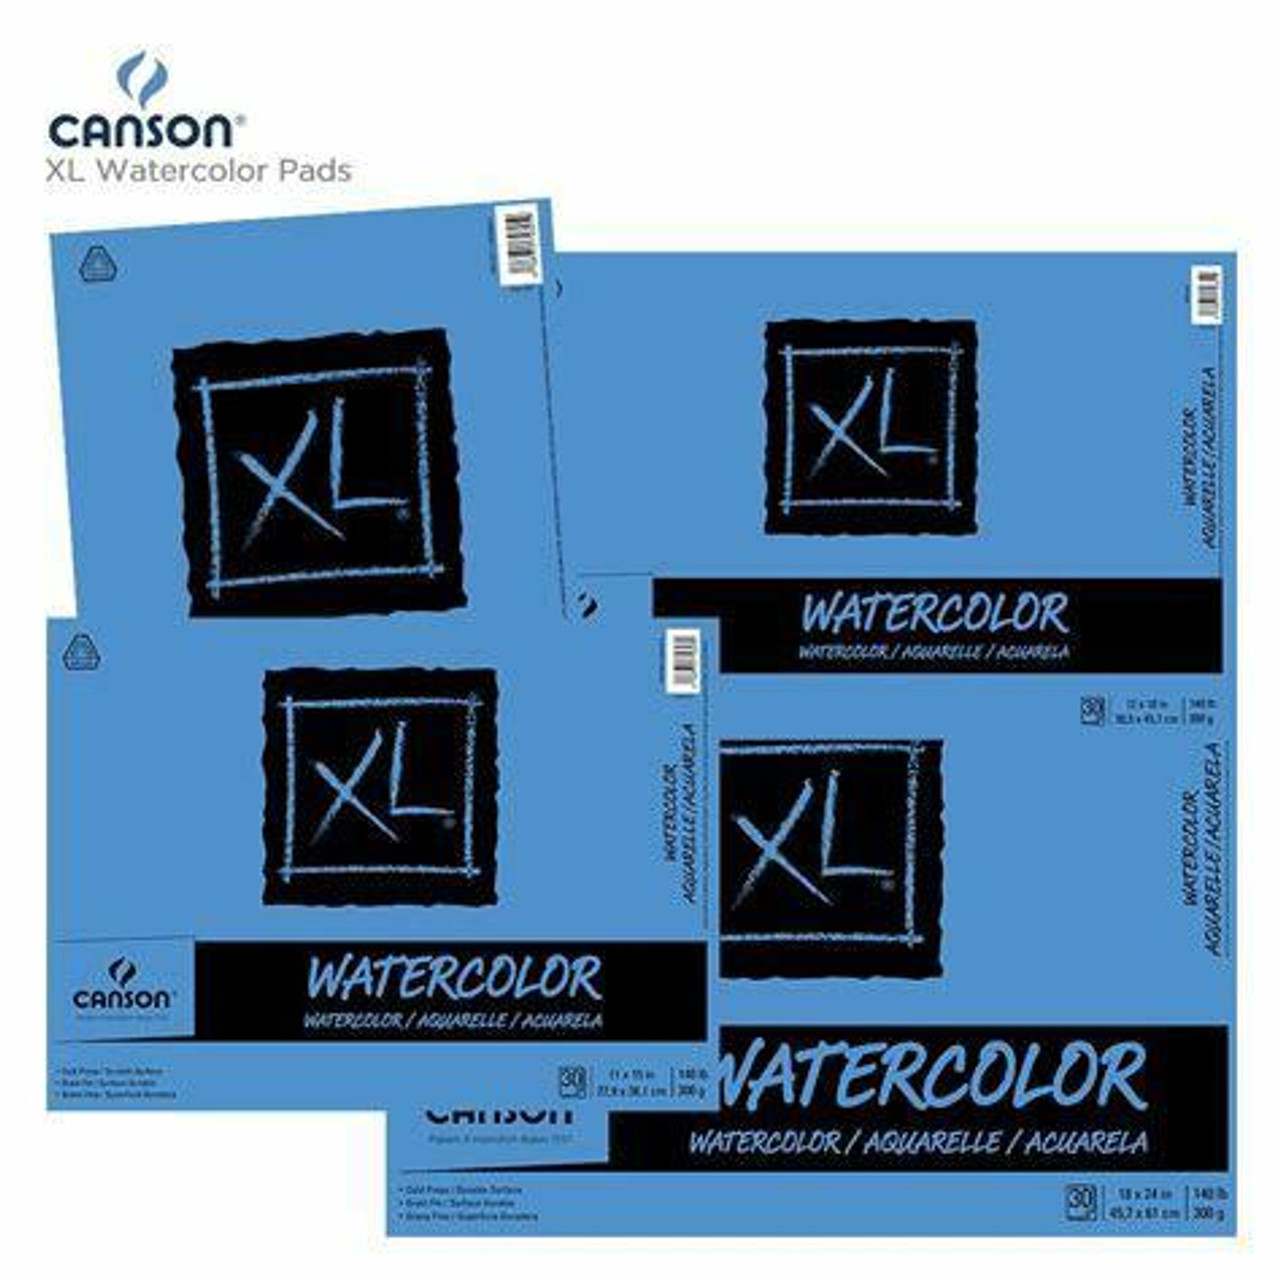  Canson XL Watercolor Pads, 9 In. x 12 In., Pad Of 30